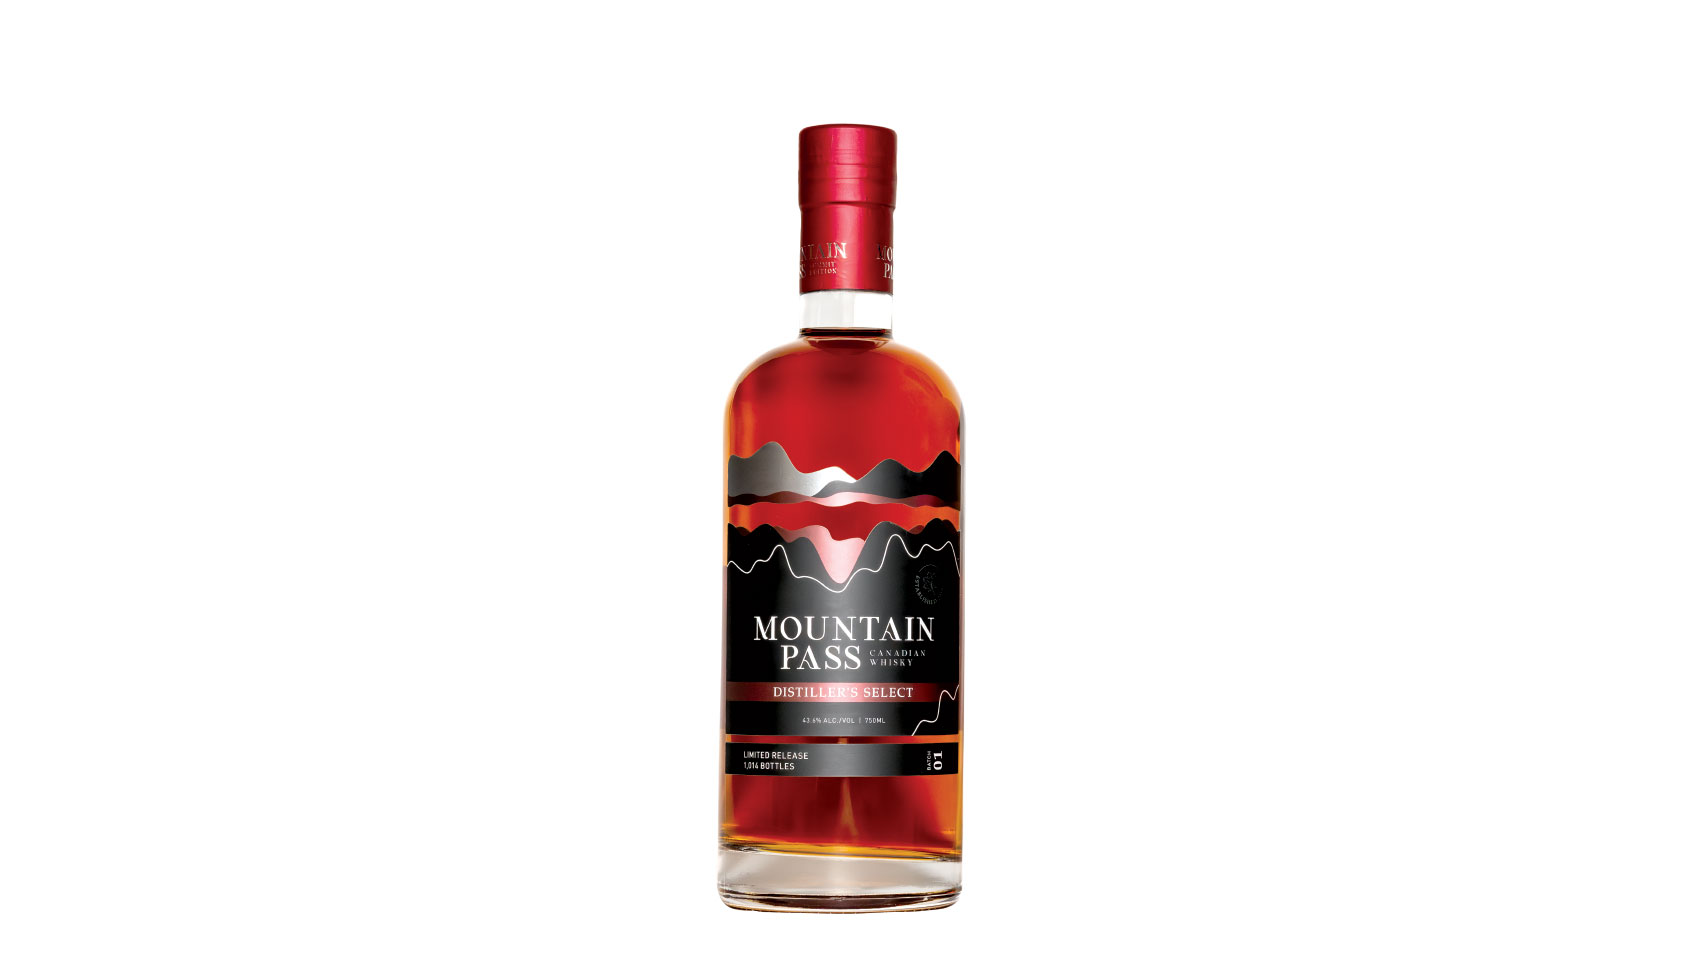 Bottle of Mountain Pass Distiller's Select Canadian Whisky